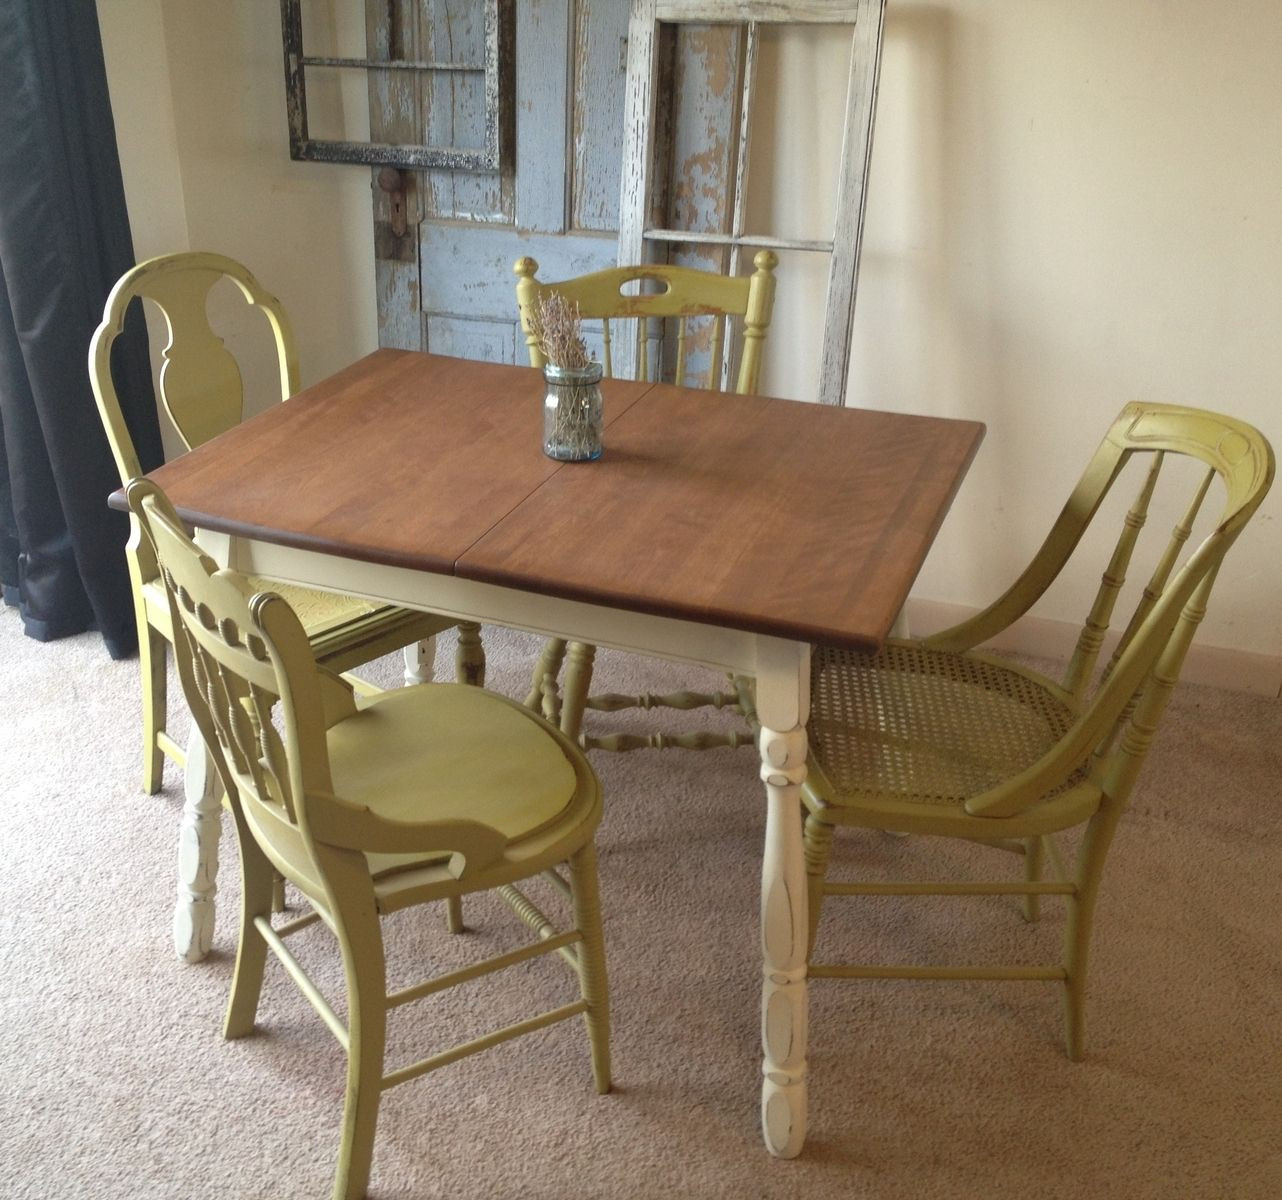 Small Wooden Kitchen Table
 Vintage Small Kitchen Table like the cream painted legs